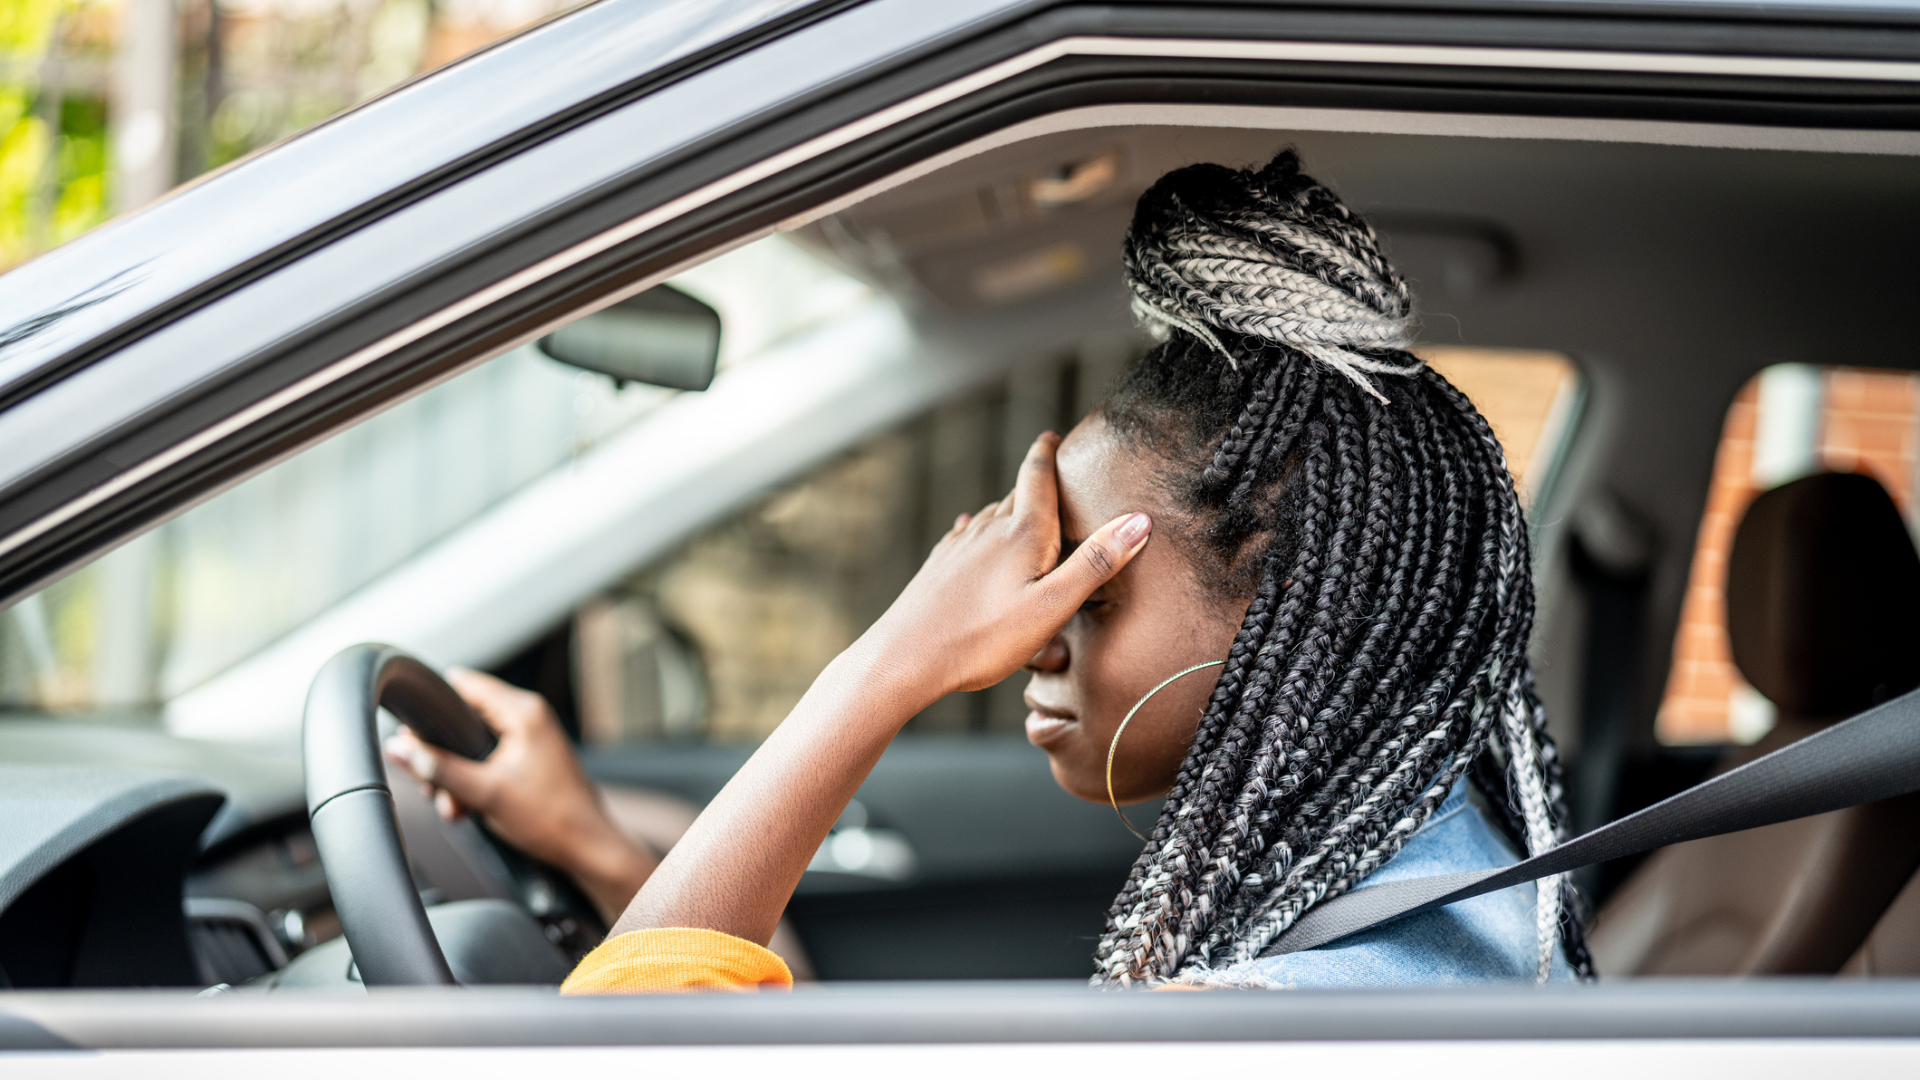 photo of a women sitting in a car in traffic, with hand on head looking frustrated